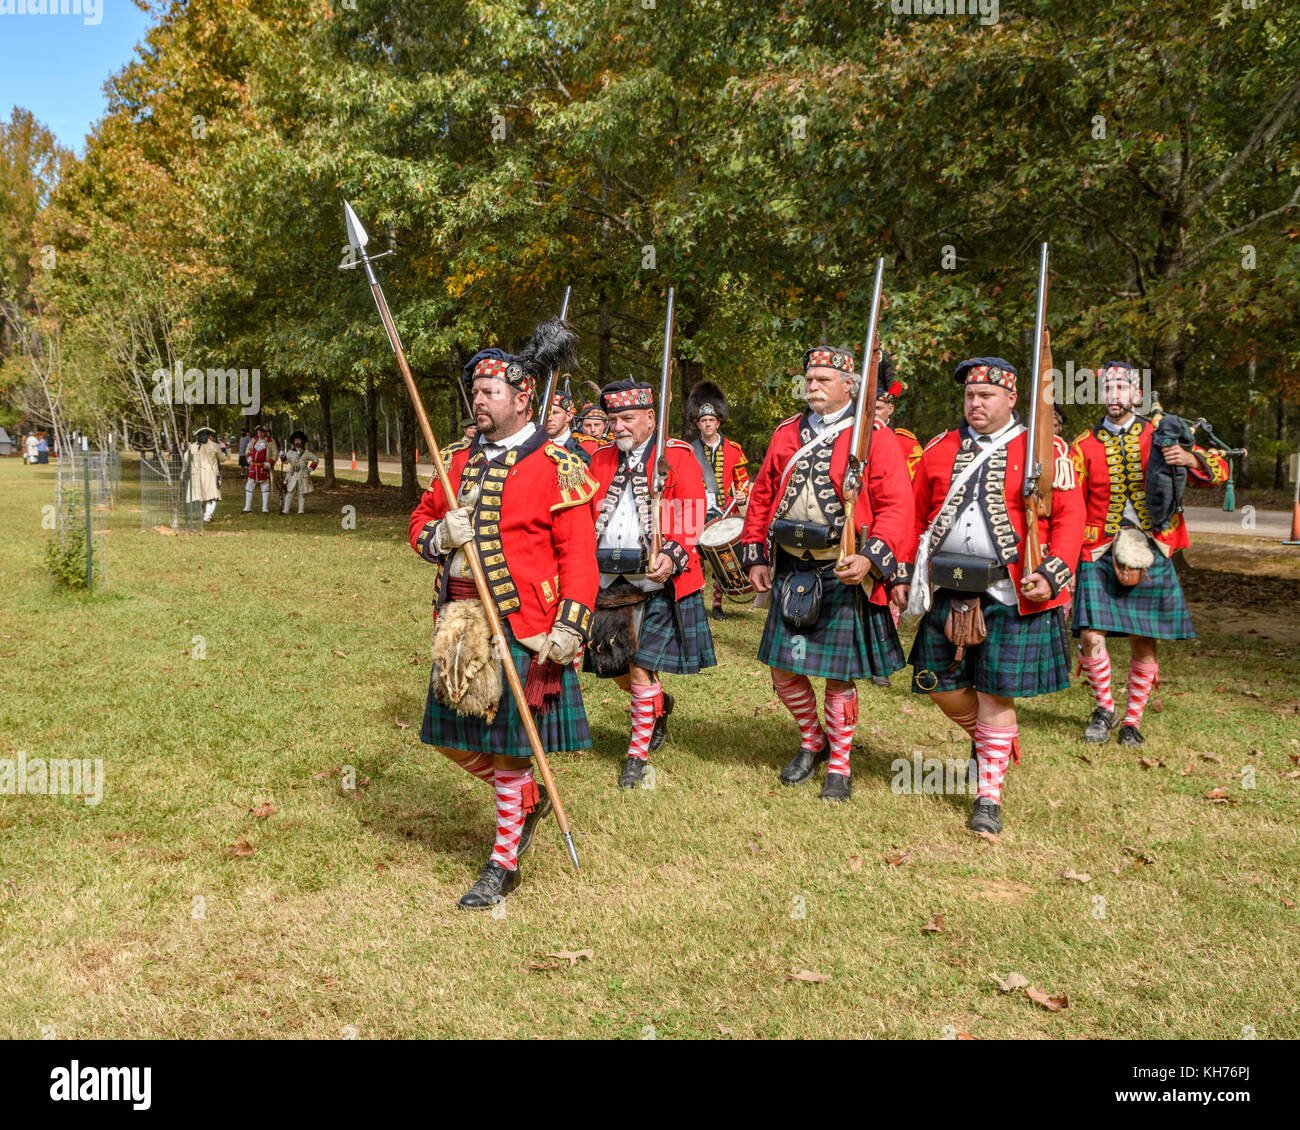 Reenactment actors portraying the 42nd Highlanders Regiment, Black Watch, of the 1700's, drum and pipes. Stock Photo